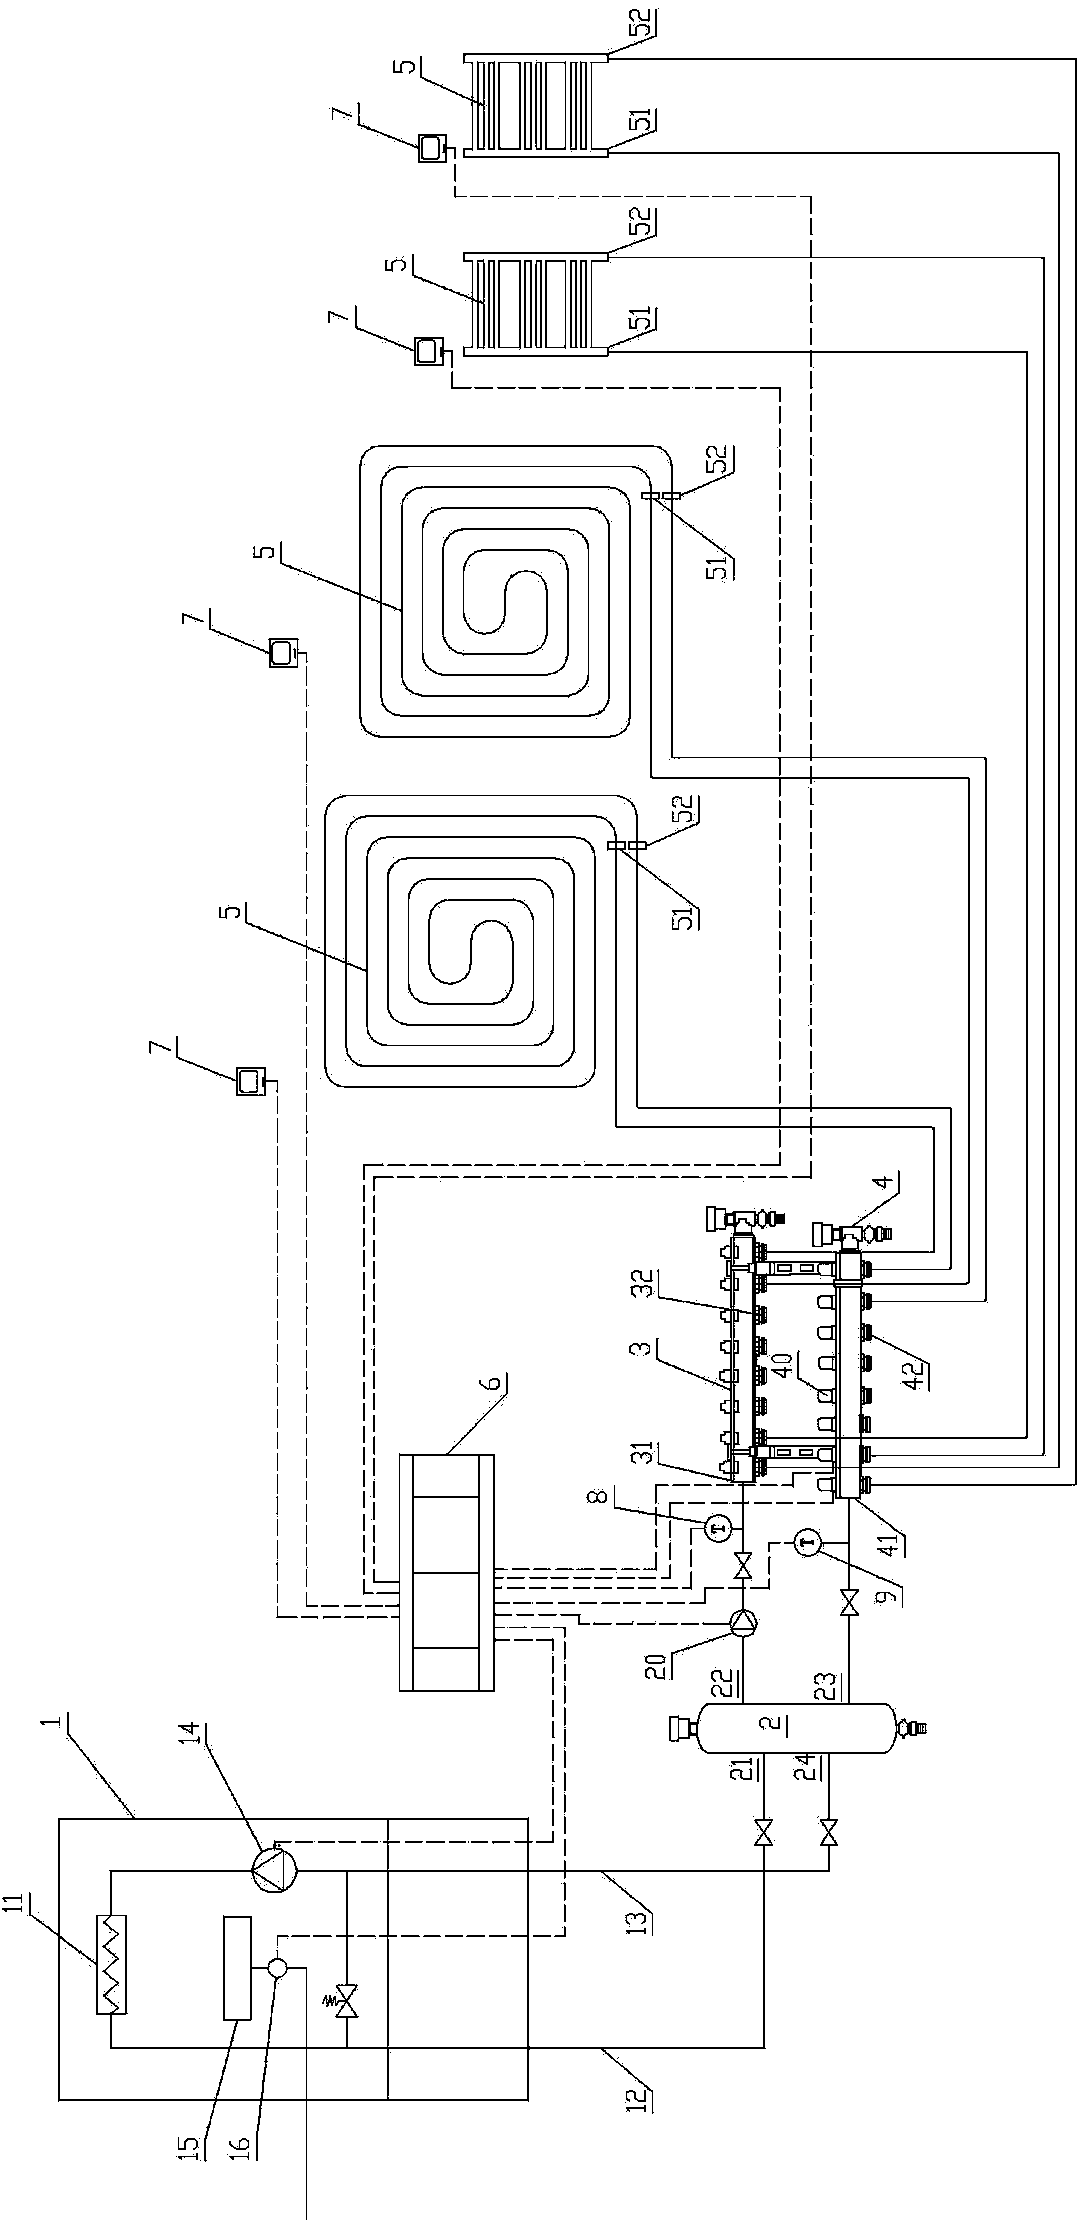 Wall-hanging stove constant temperature control method and system based on chambered temperature control floor heating